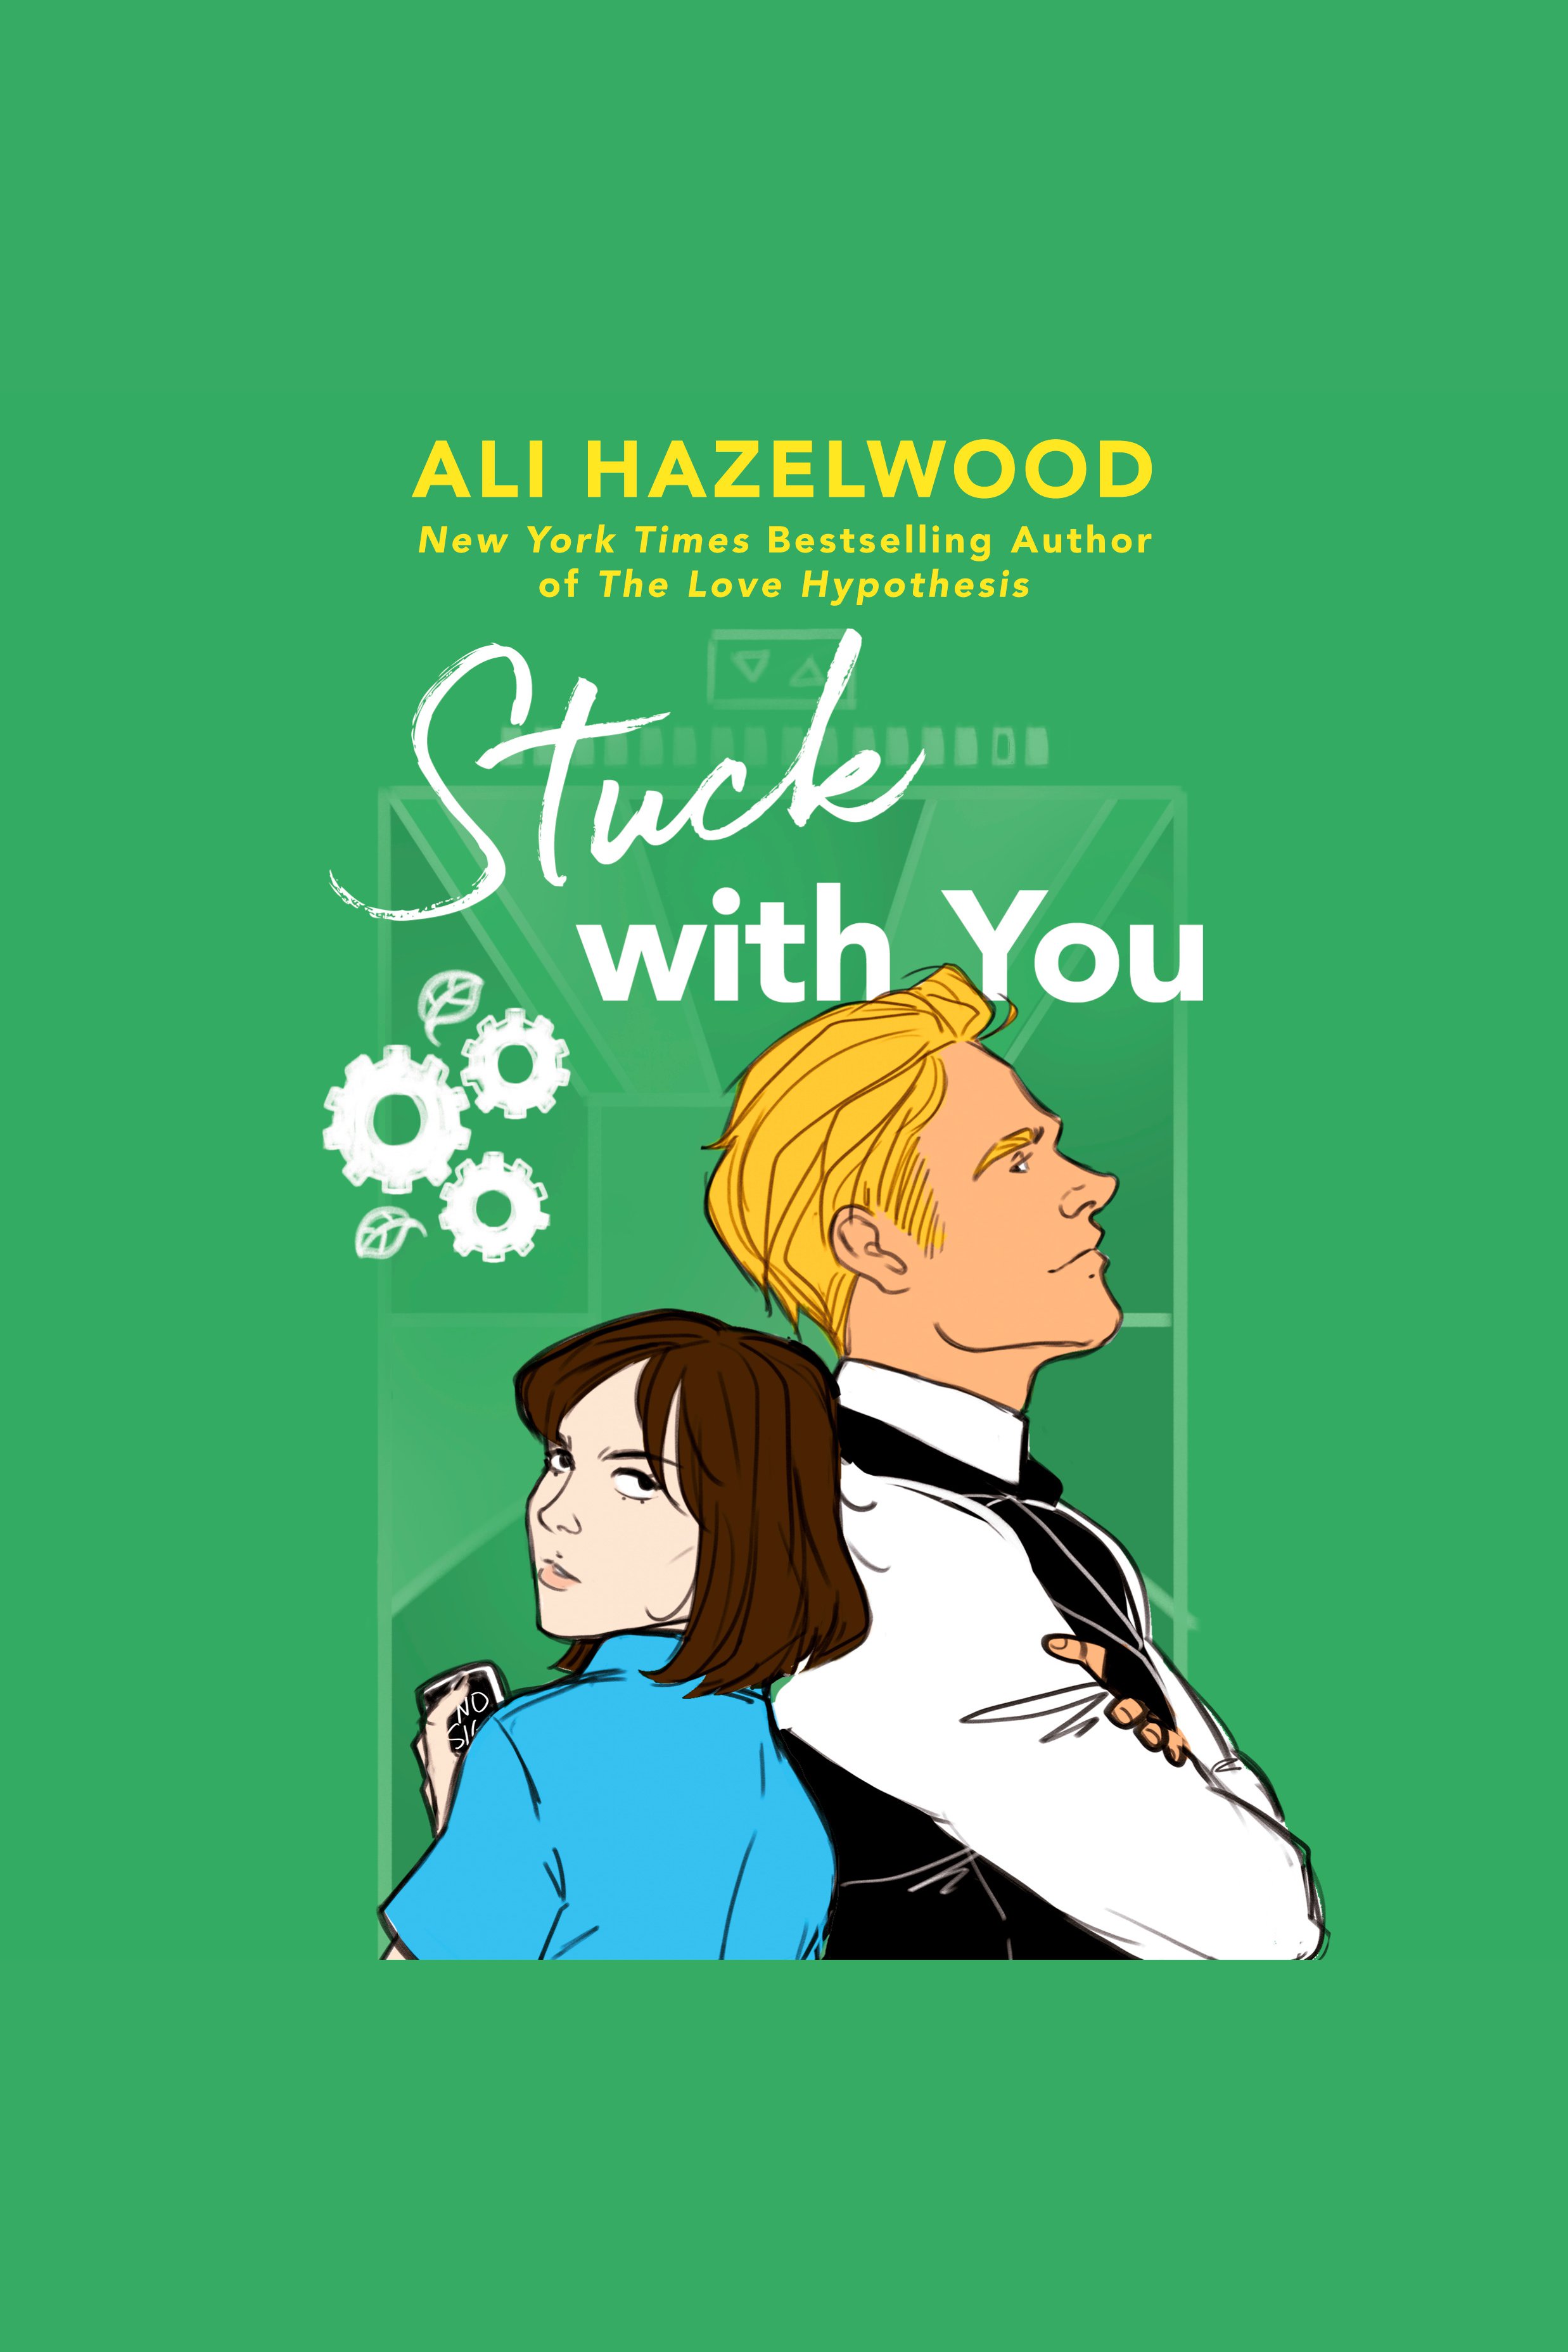 Cover Image of Stuck with You